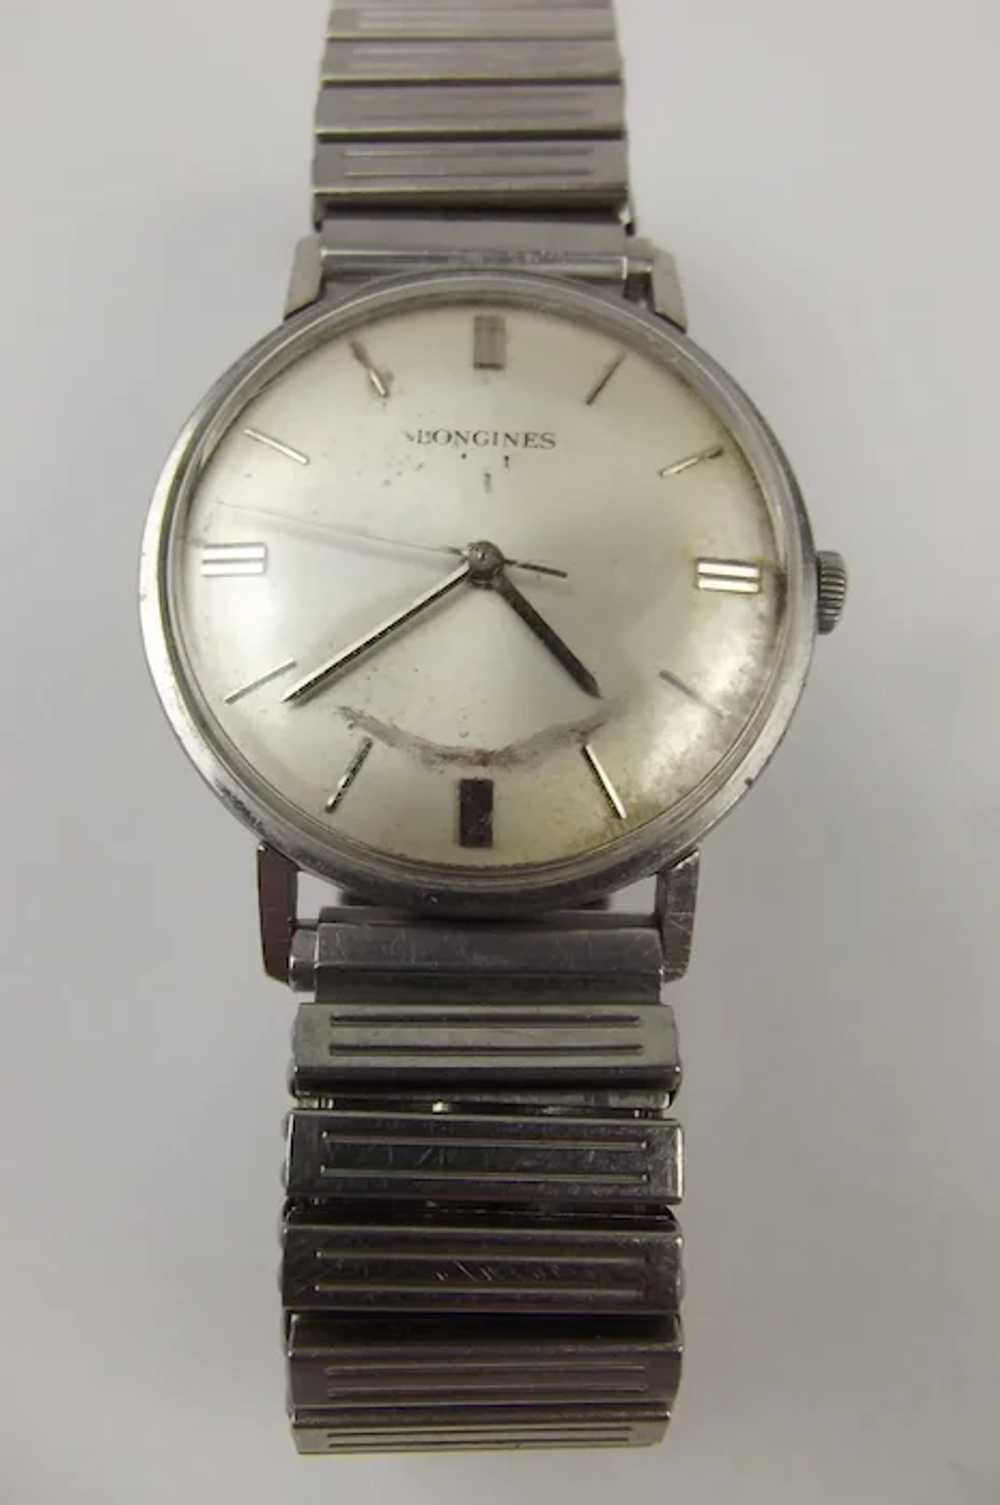 Longines Gents Stainless Steel Wrist Watch c1970’s - image 2